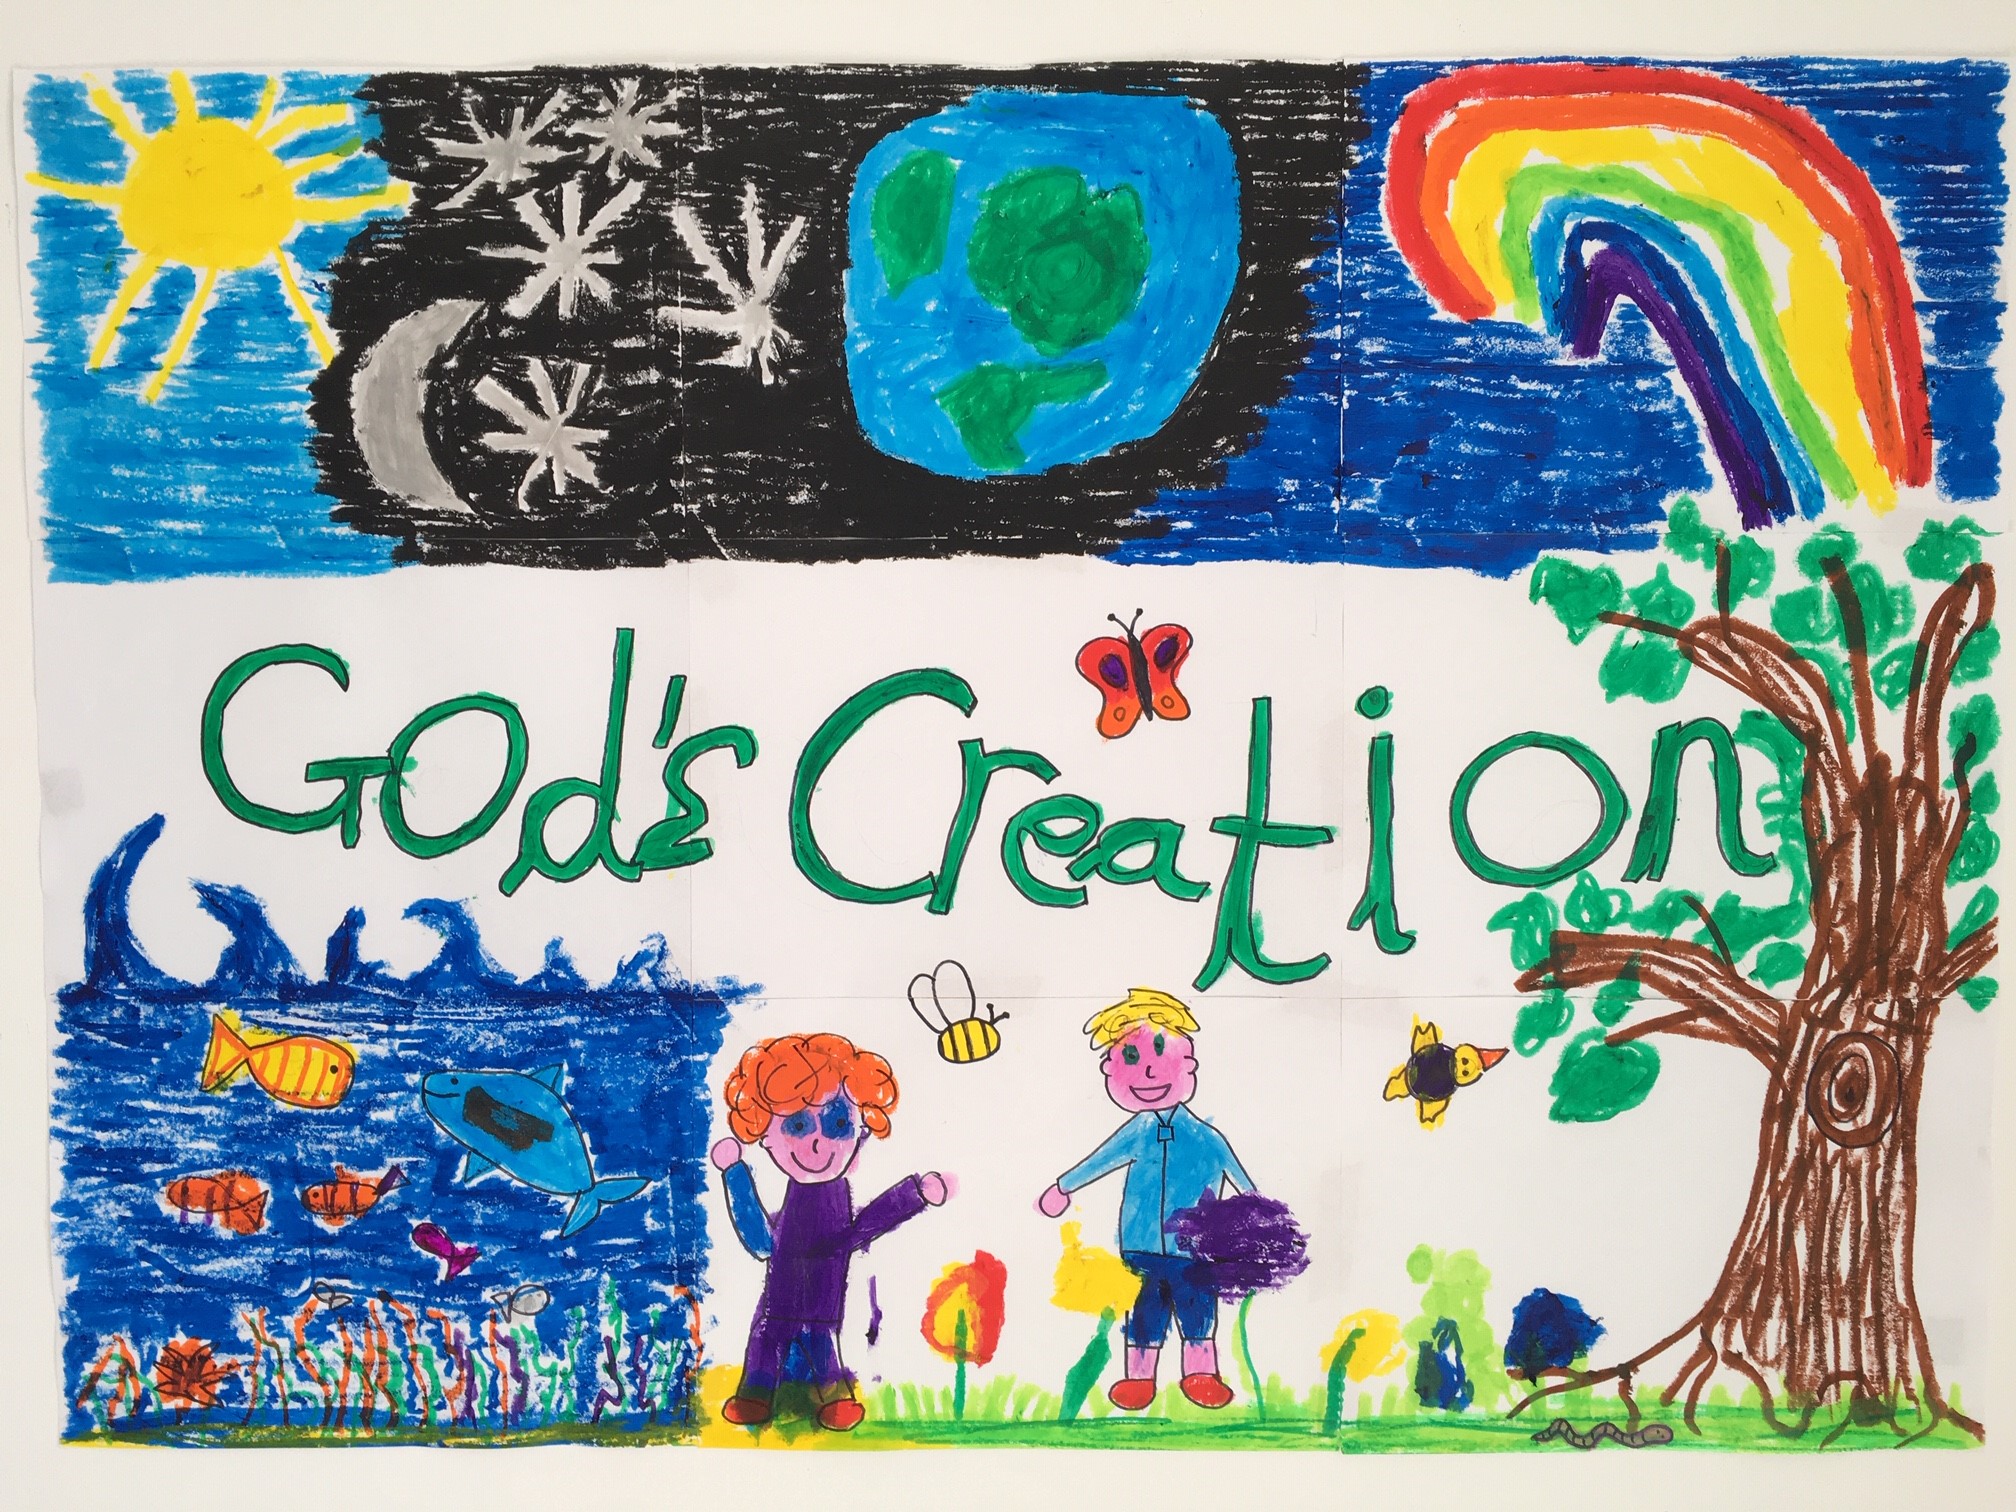 A hand-drawn picture of 'God's creation'.